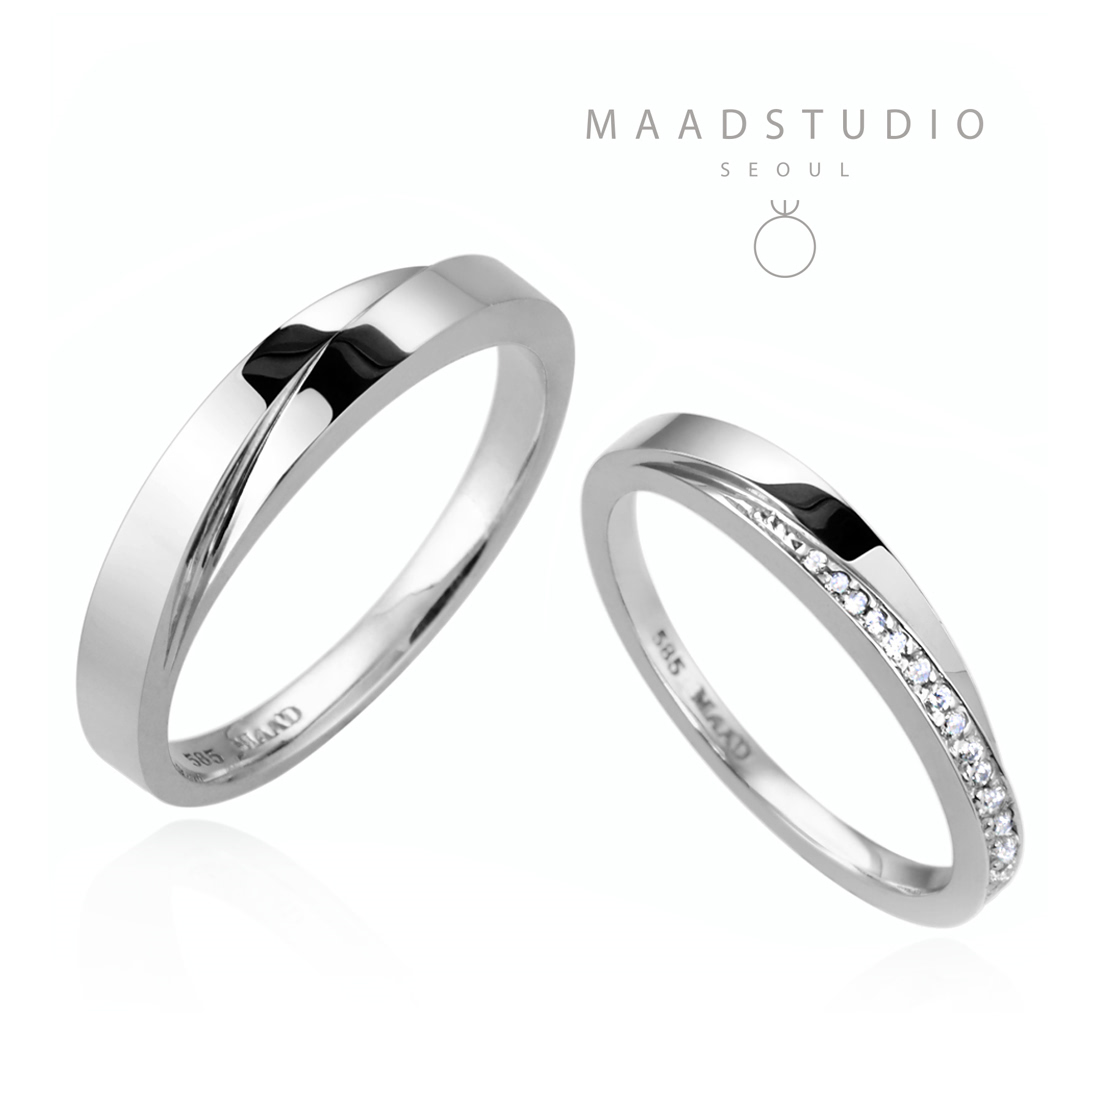 Unison couple ring Set (M&S) CZ & flat Sterling silver